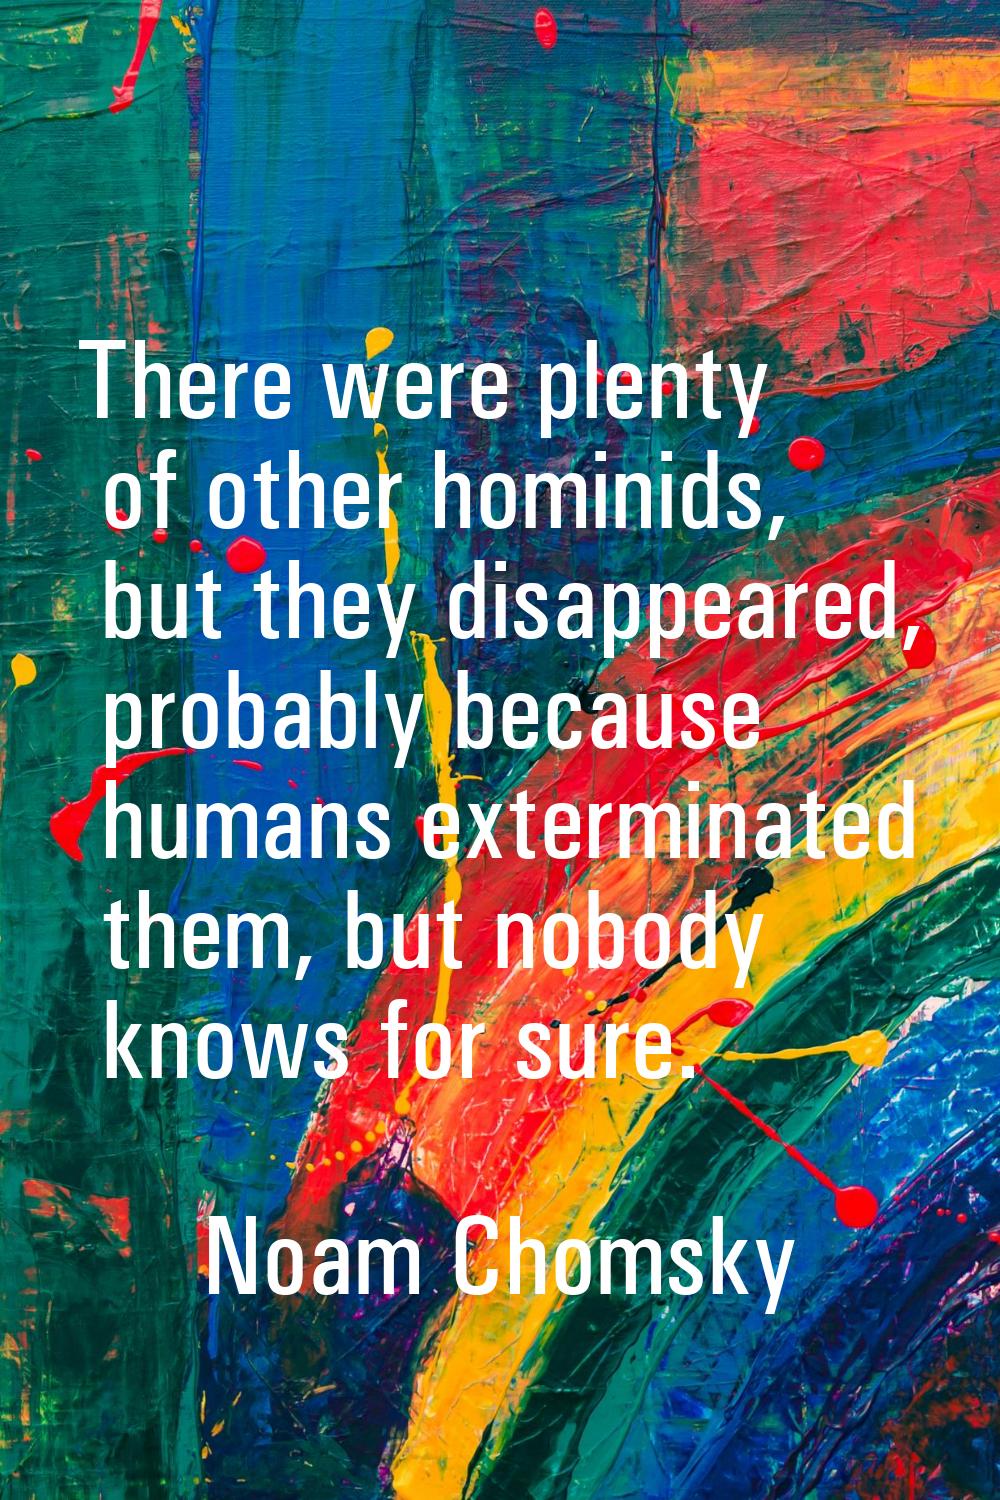 There were plenty of other hominids, but they disappeared, probably because humans exterminated the